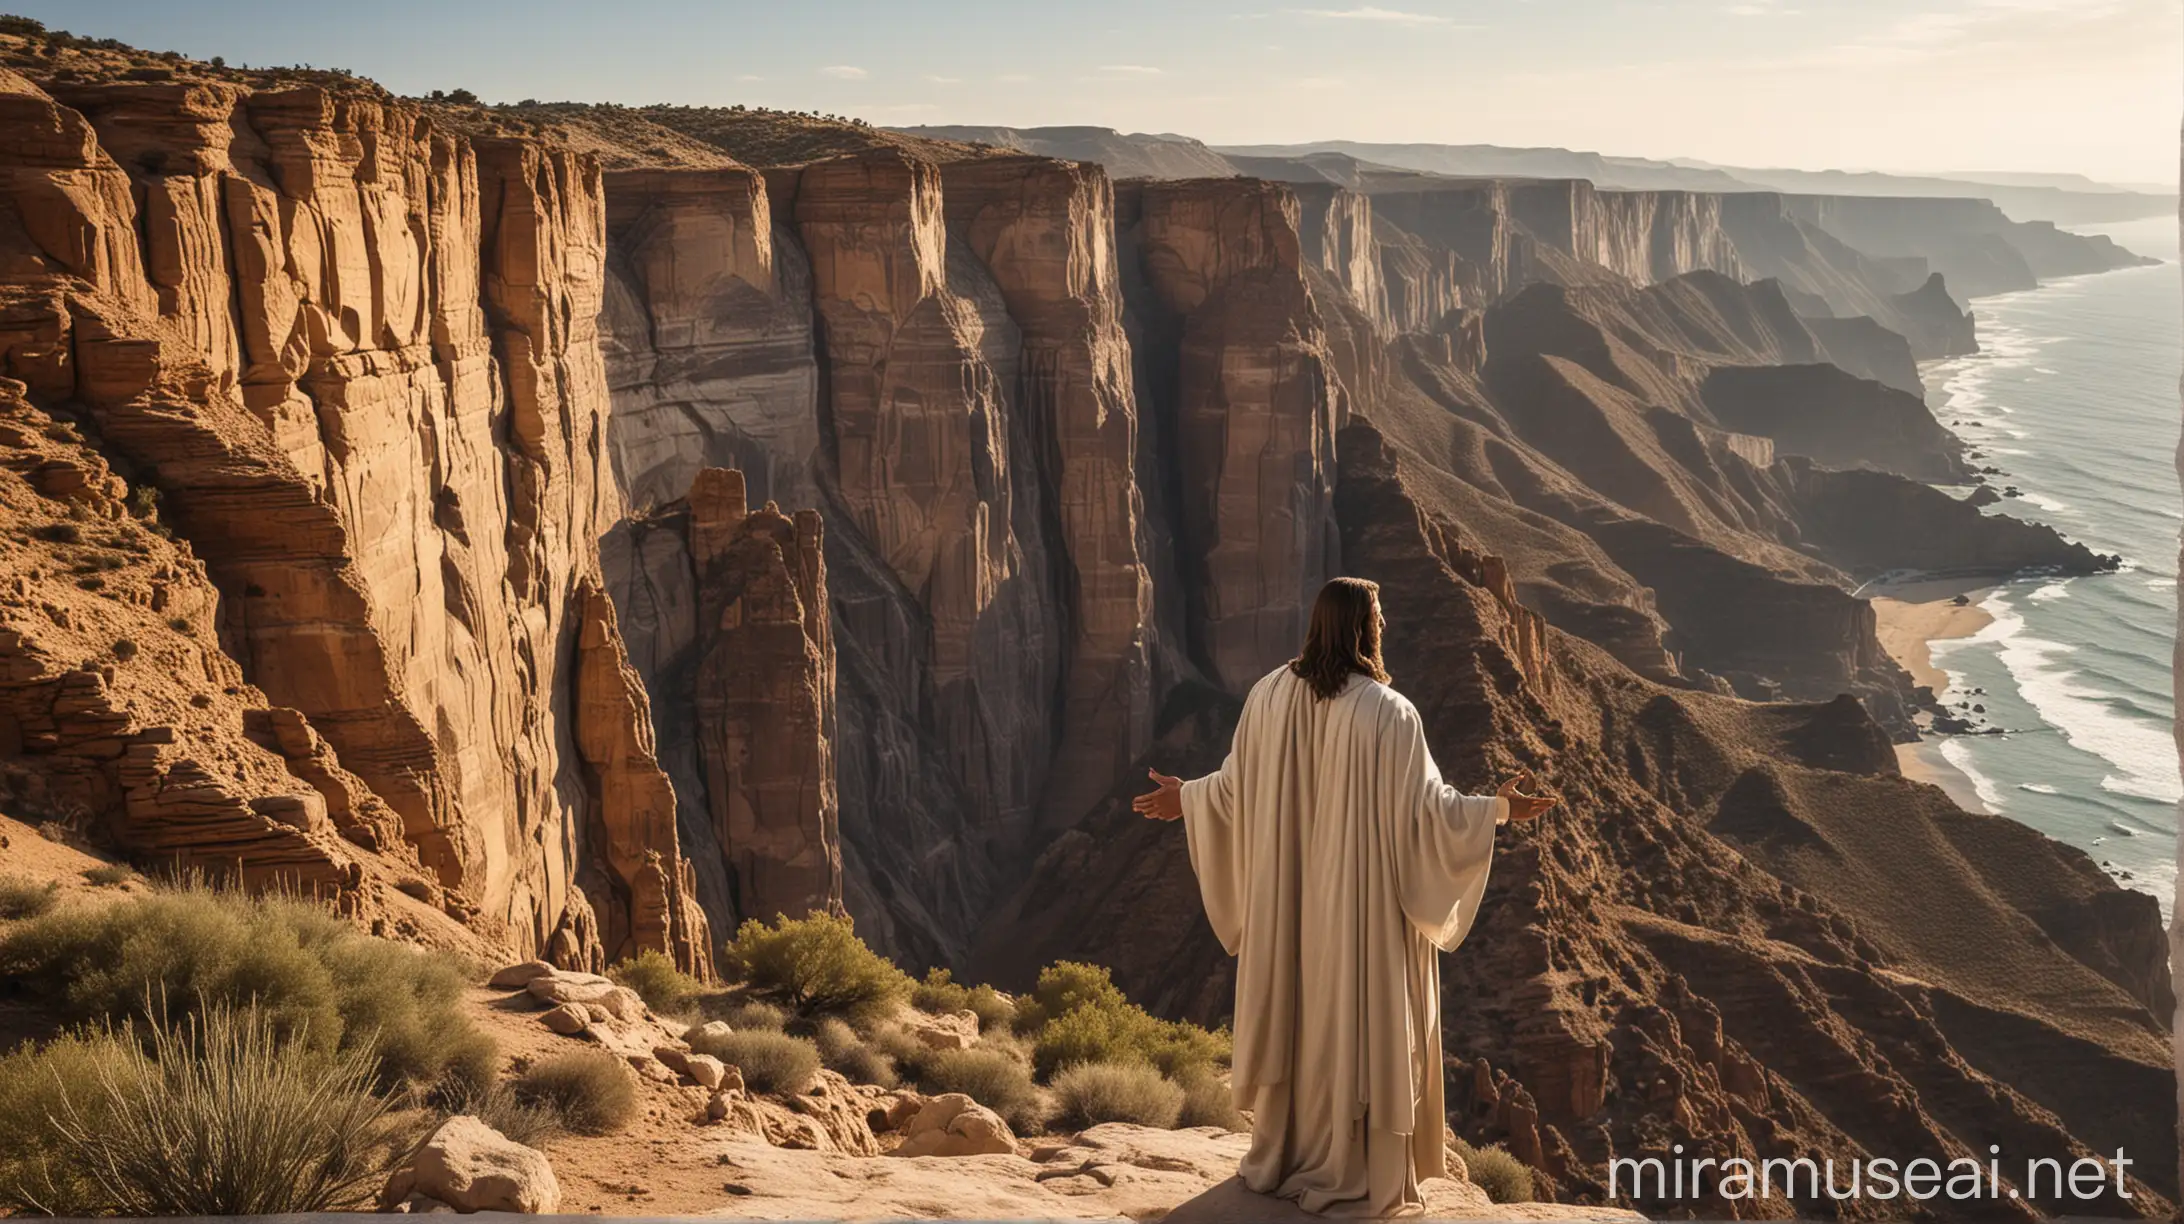 
Prophet Yesus overlooking the stunning view of the Cliffs...